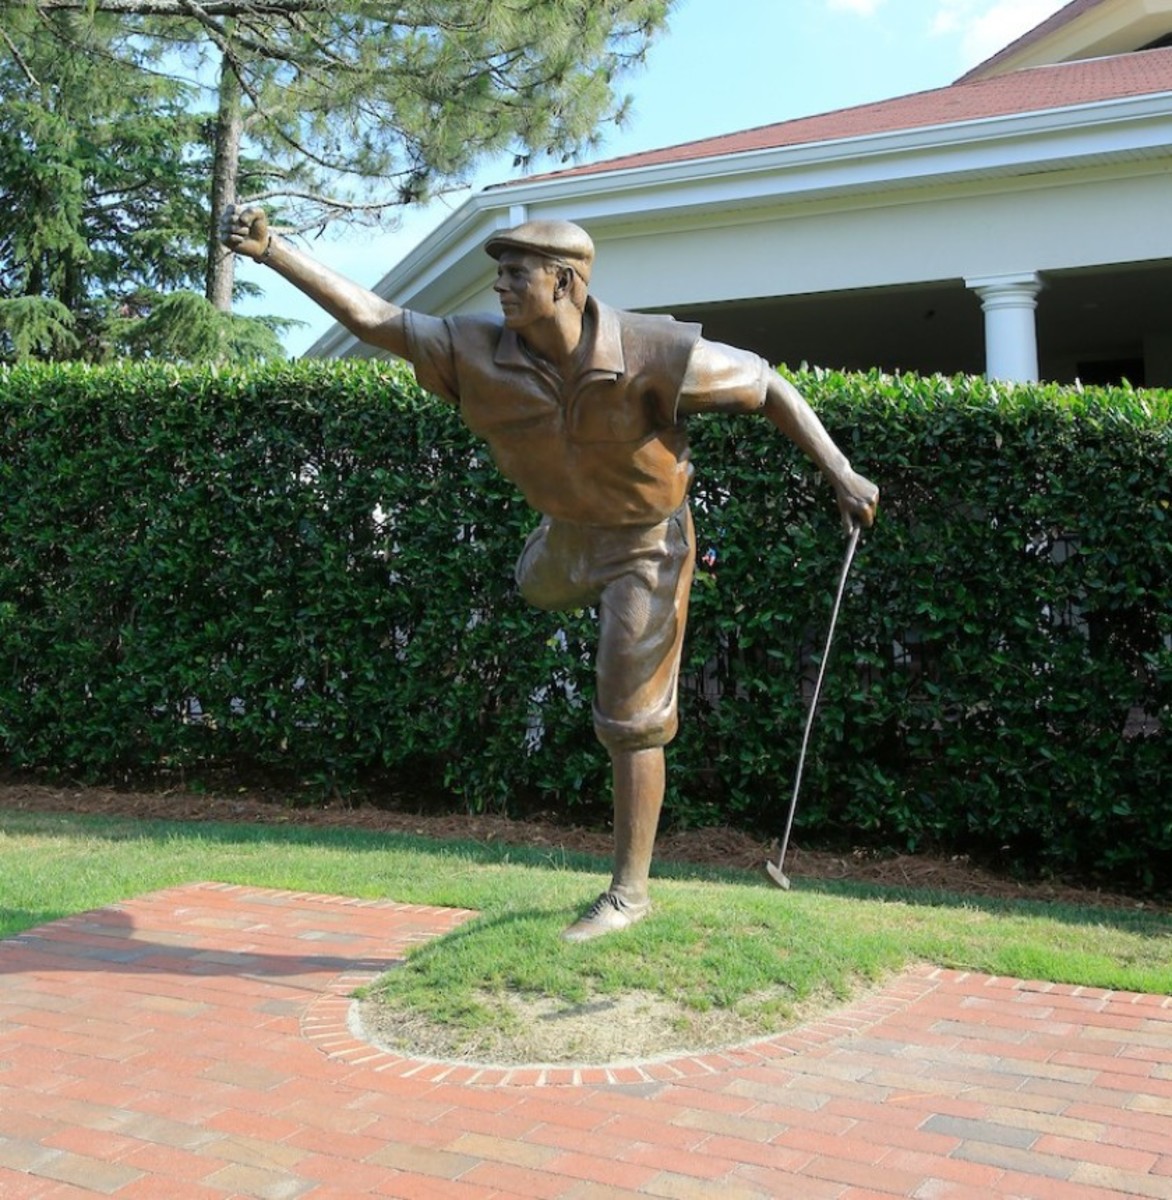 A statue at Pinehurst (N.C.) Resort’s No. 2 Course honors the late Payne Stewart for his iconic reaction upon winning the 1999 U.S. Open. 